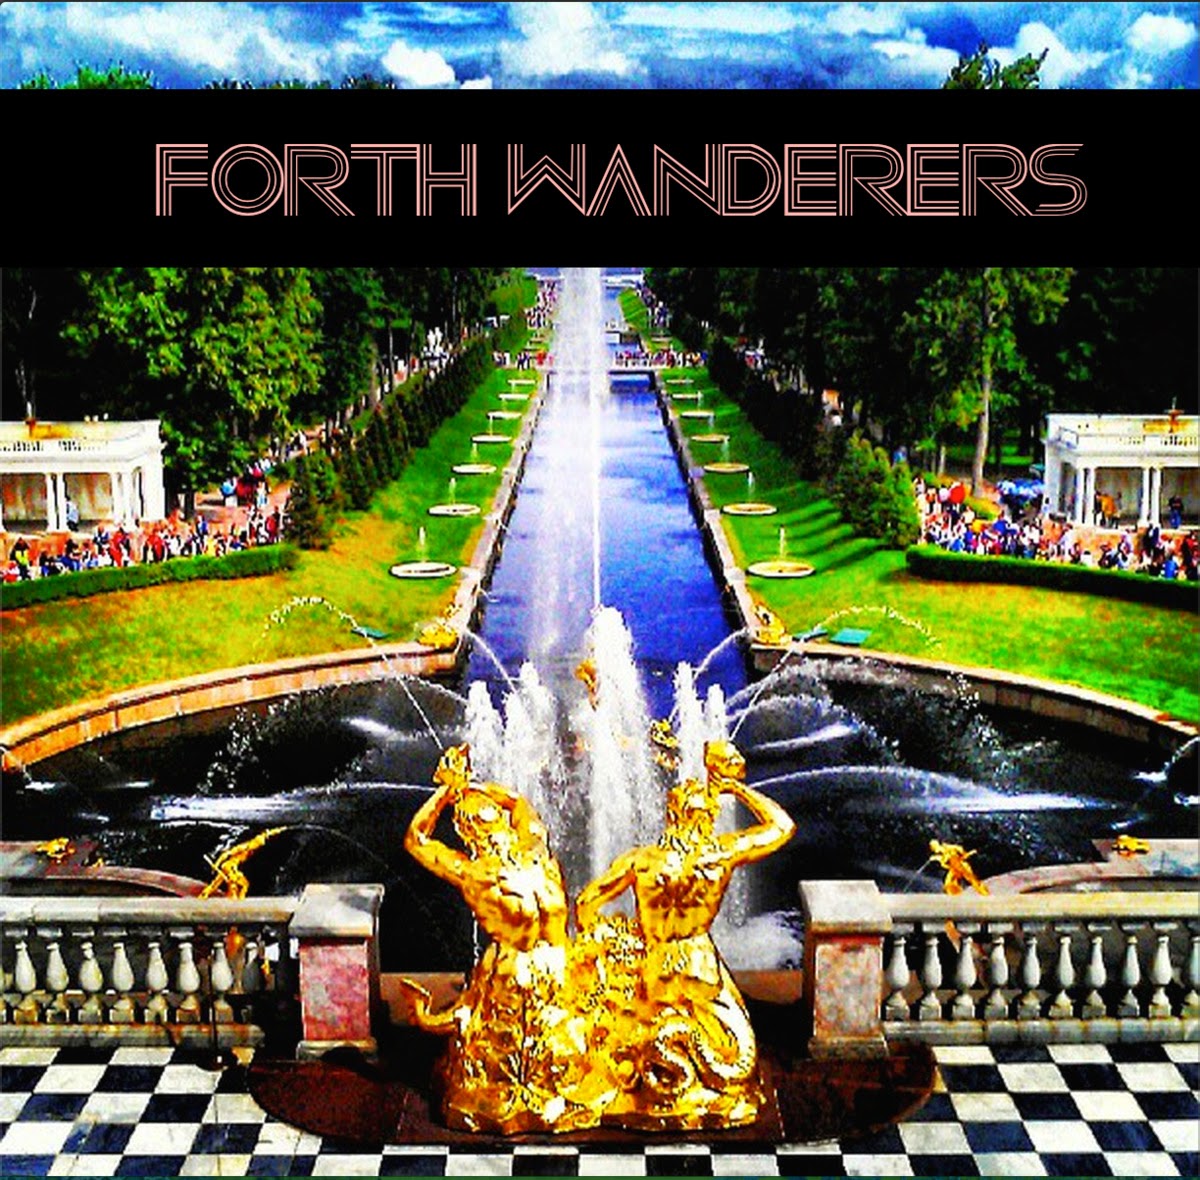 Forth Wanderers : Debut "Tough Love" Is Easy to Fall In Love With